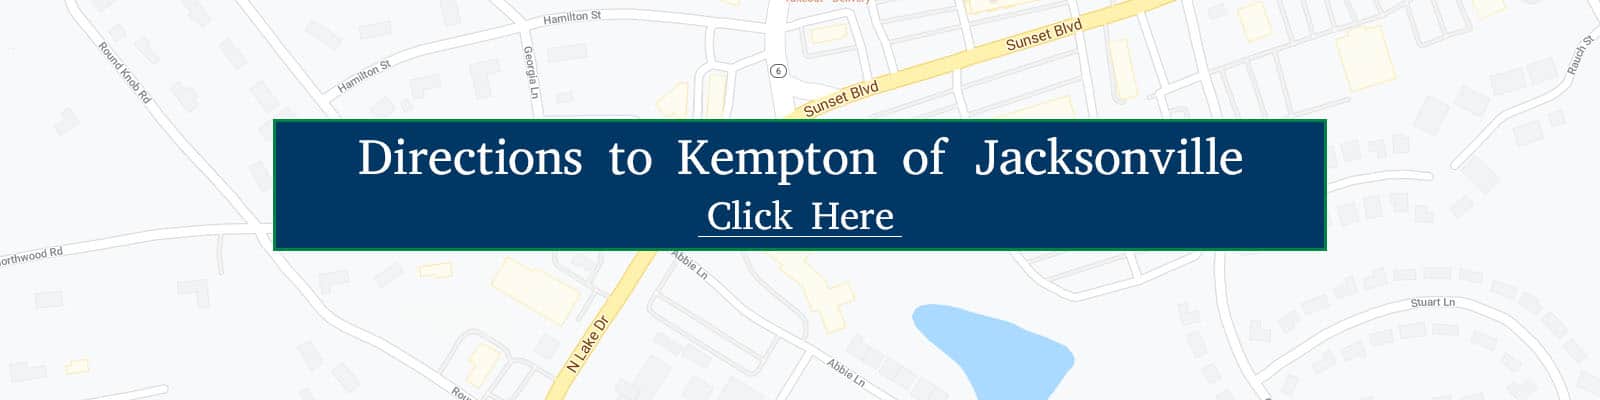 Directions and Map to Kempton of Jacksonville